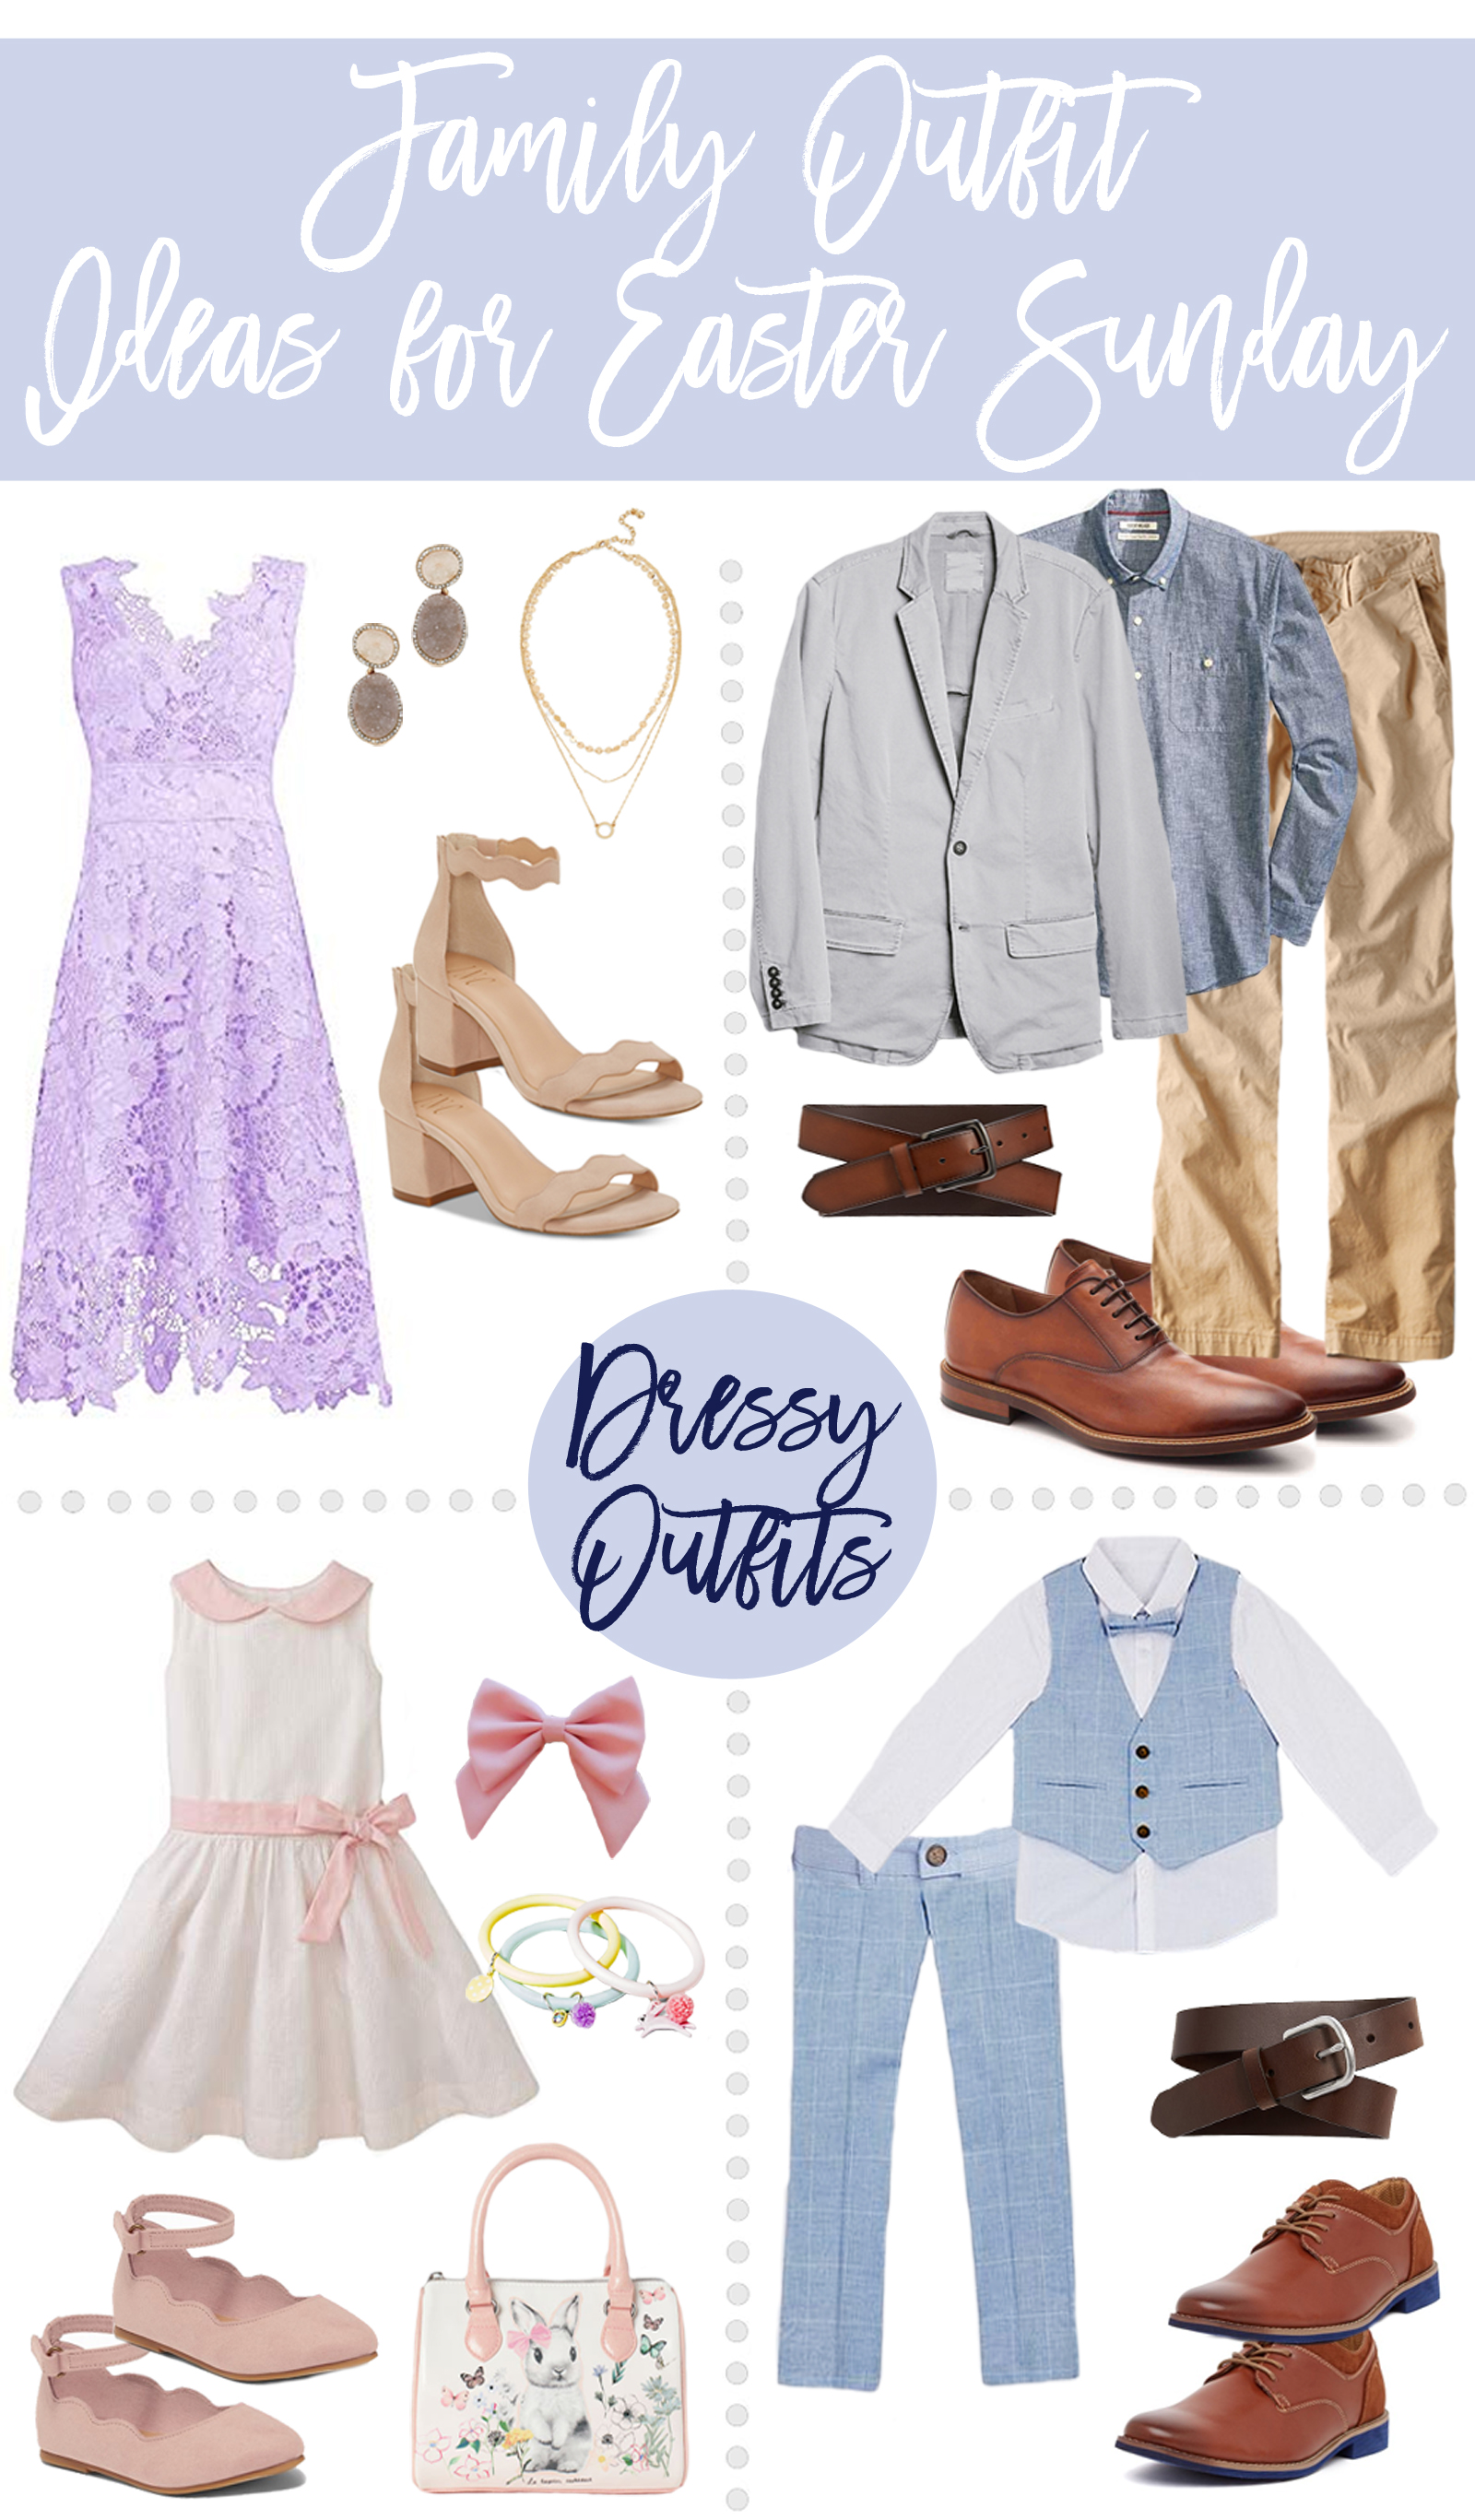 Family Easter Outfit Ideas Casual and Dressy SandyALaMode